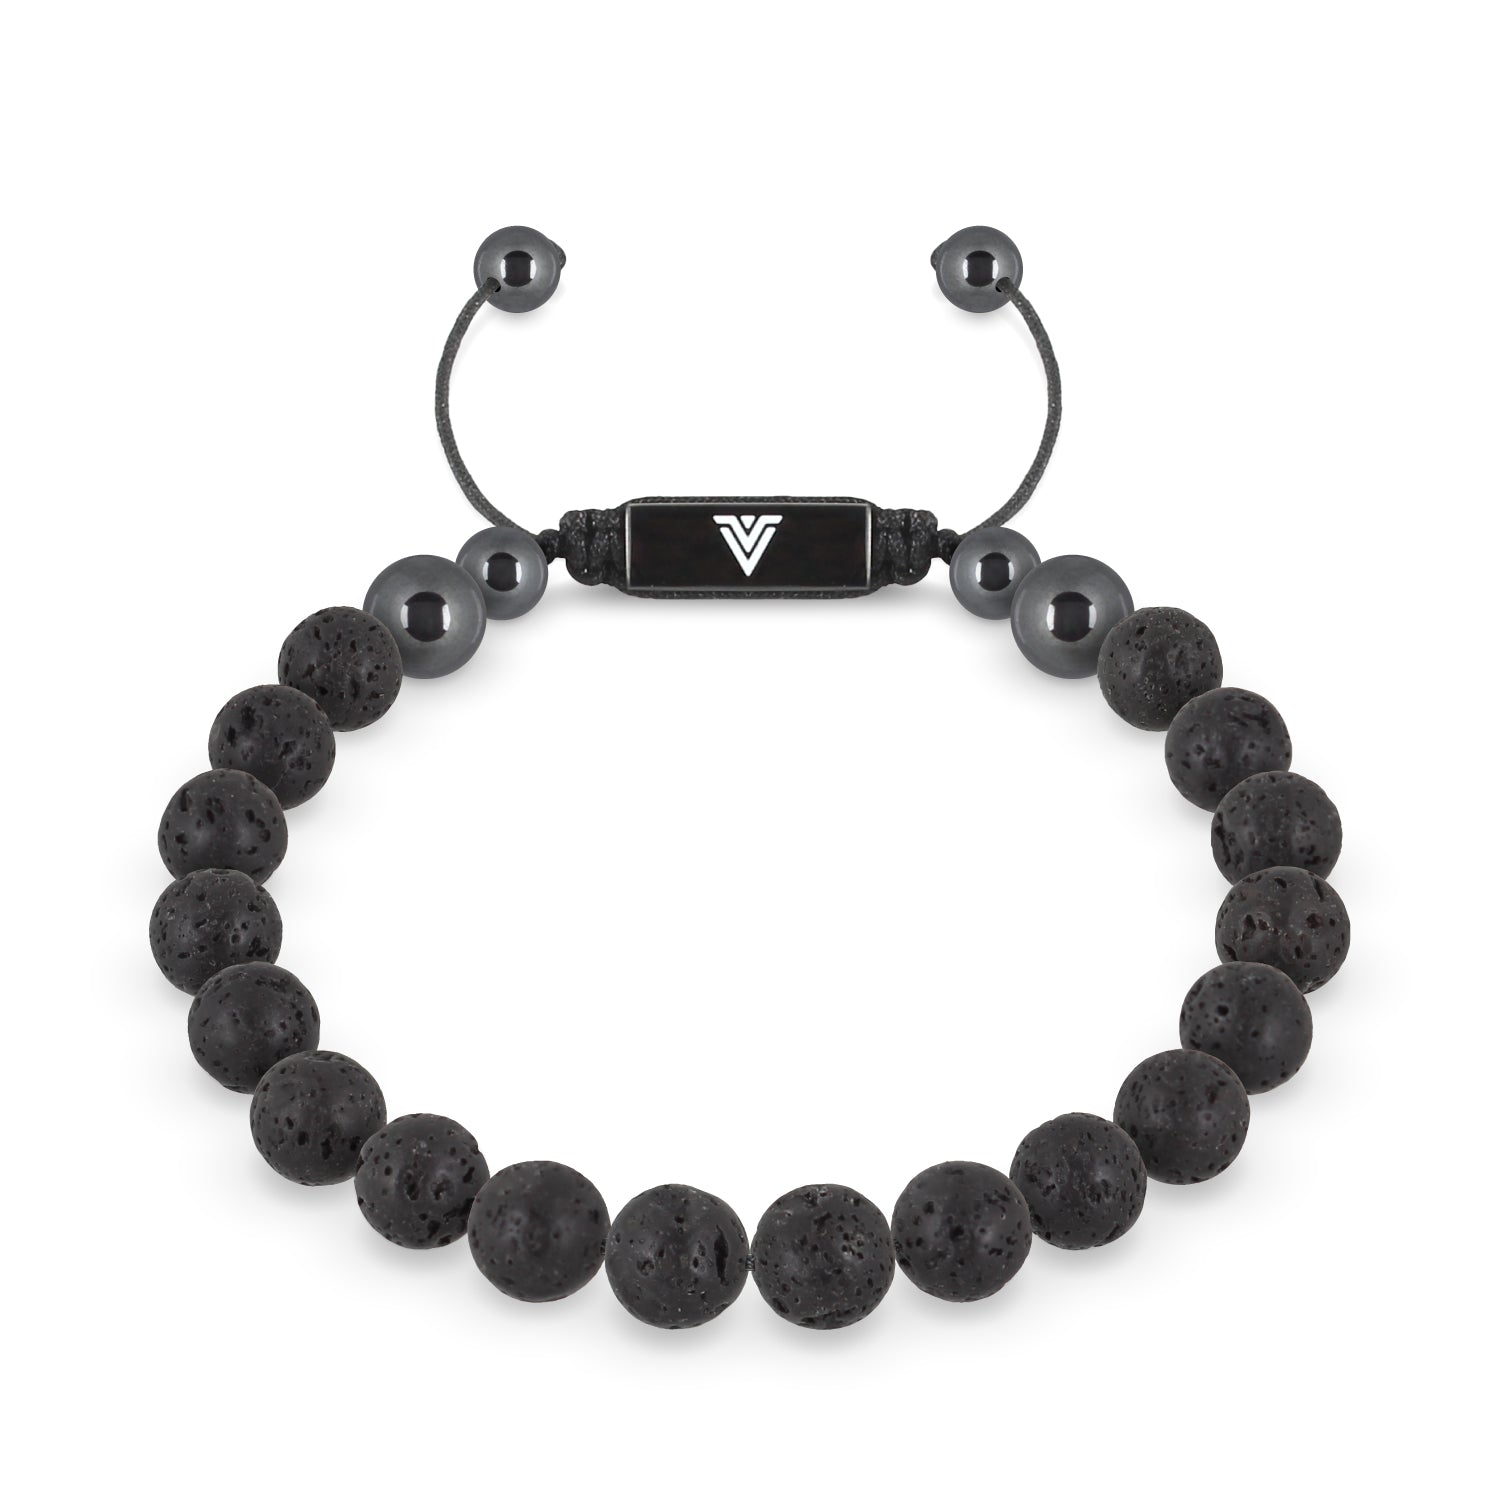 Front view of an 8mm Lava Stone crystal beaded shamballa bracelet with black stainless steel logo bead made by Voltlin